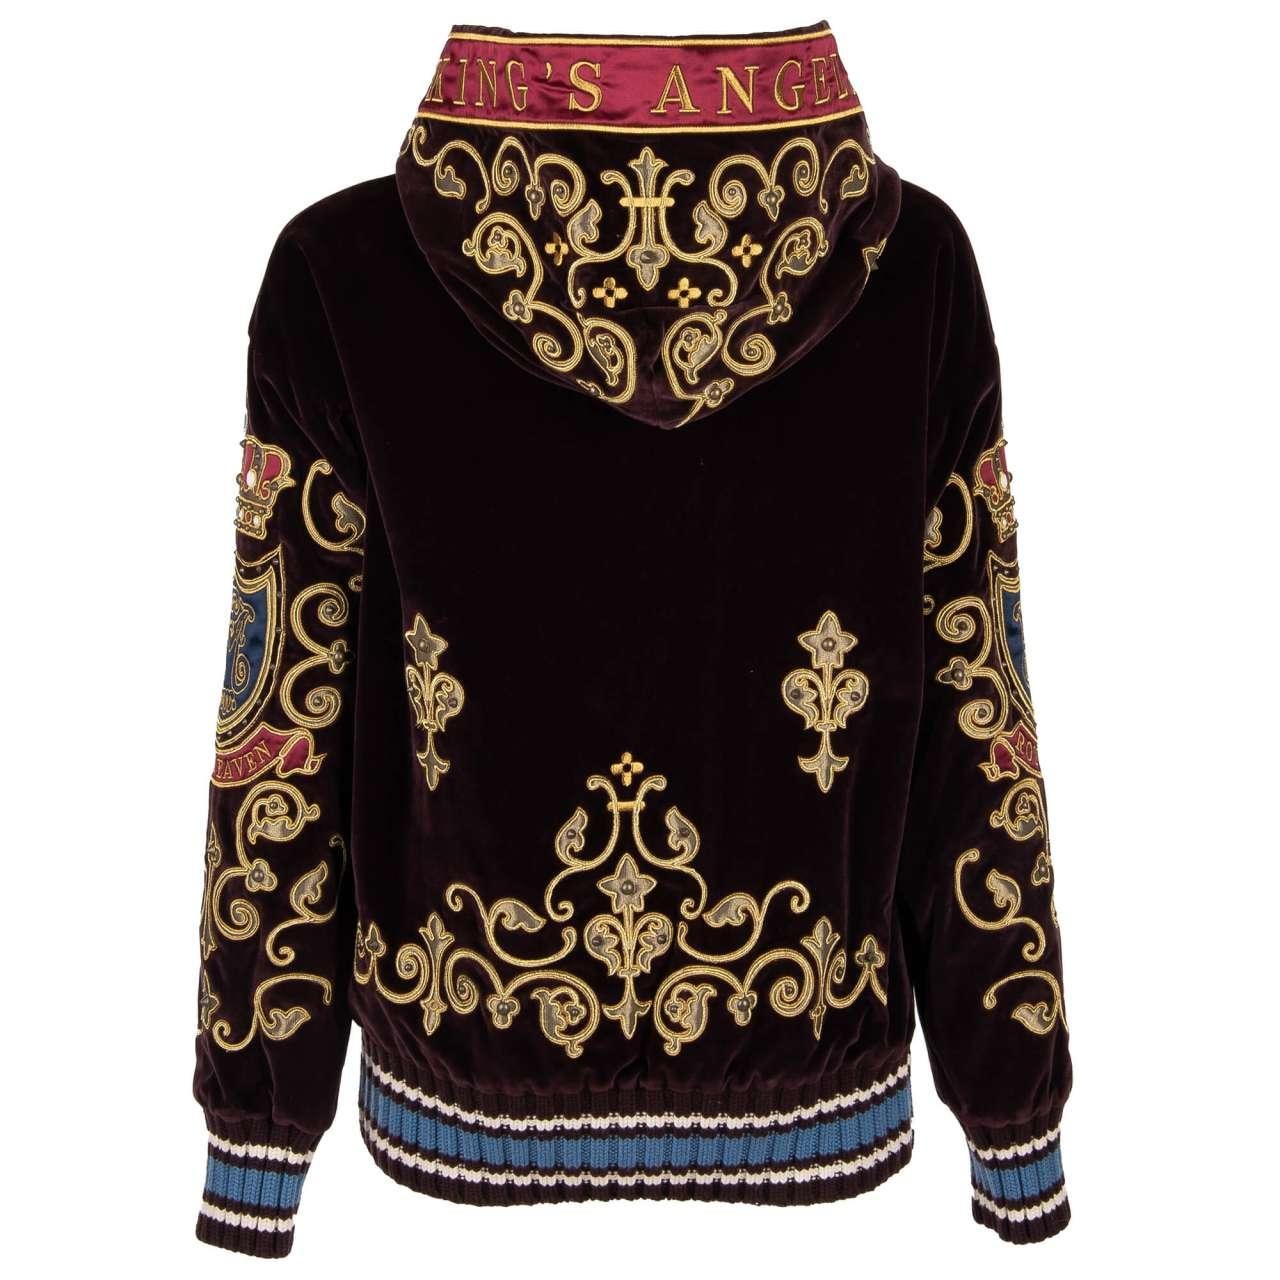 D&G Velvet Hoody Sweater with San Michele Crown King Embroidery Bordeaux Gold 52 In Excellent Condition For Sale In Erkrath, DE